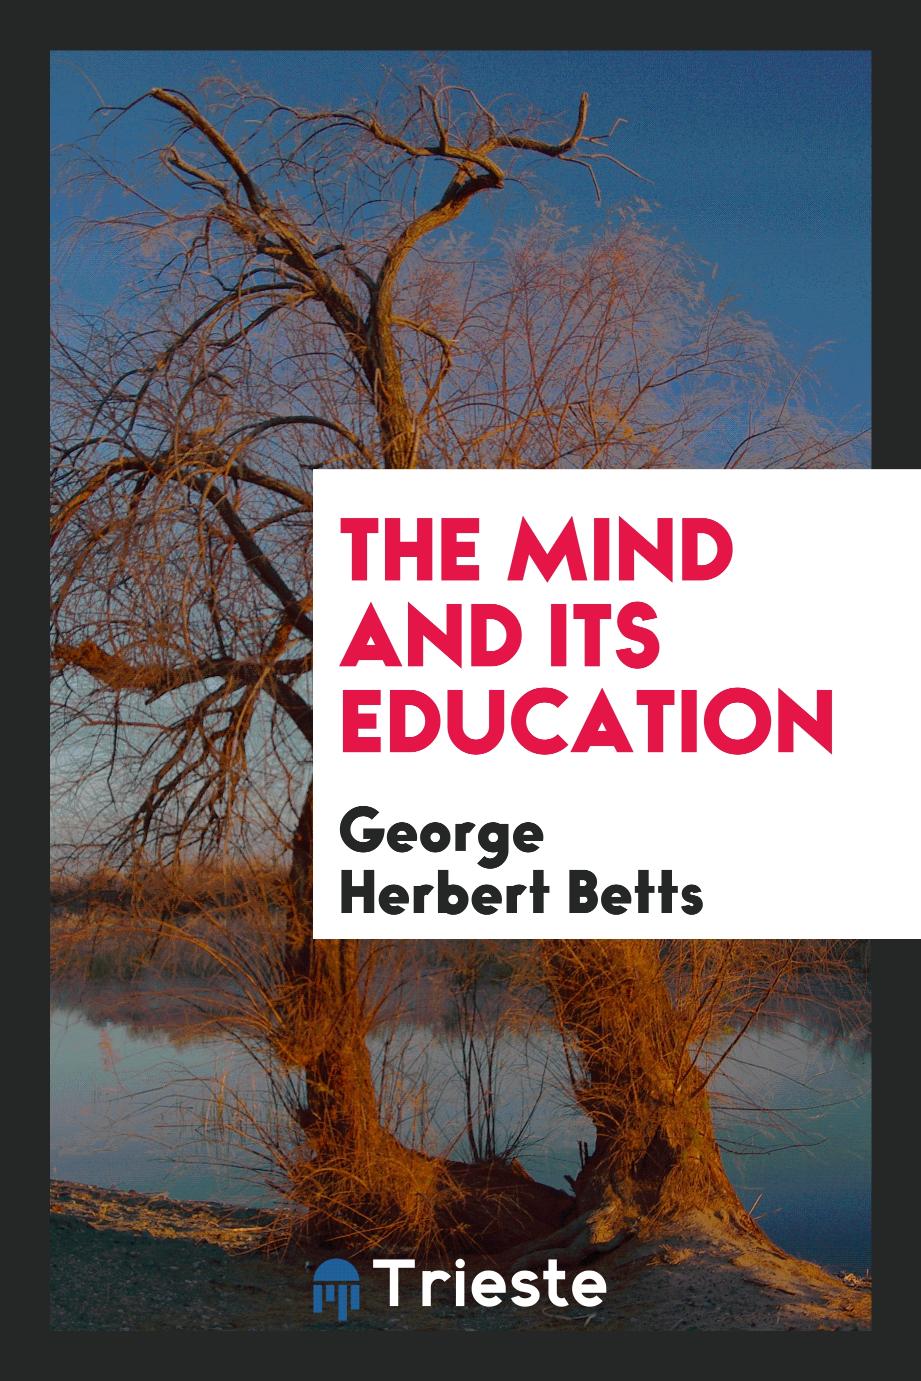 The mind and its education